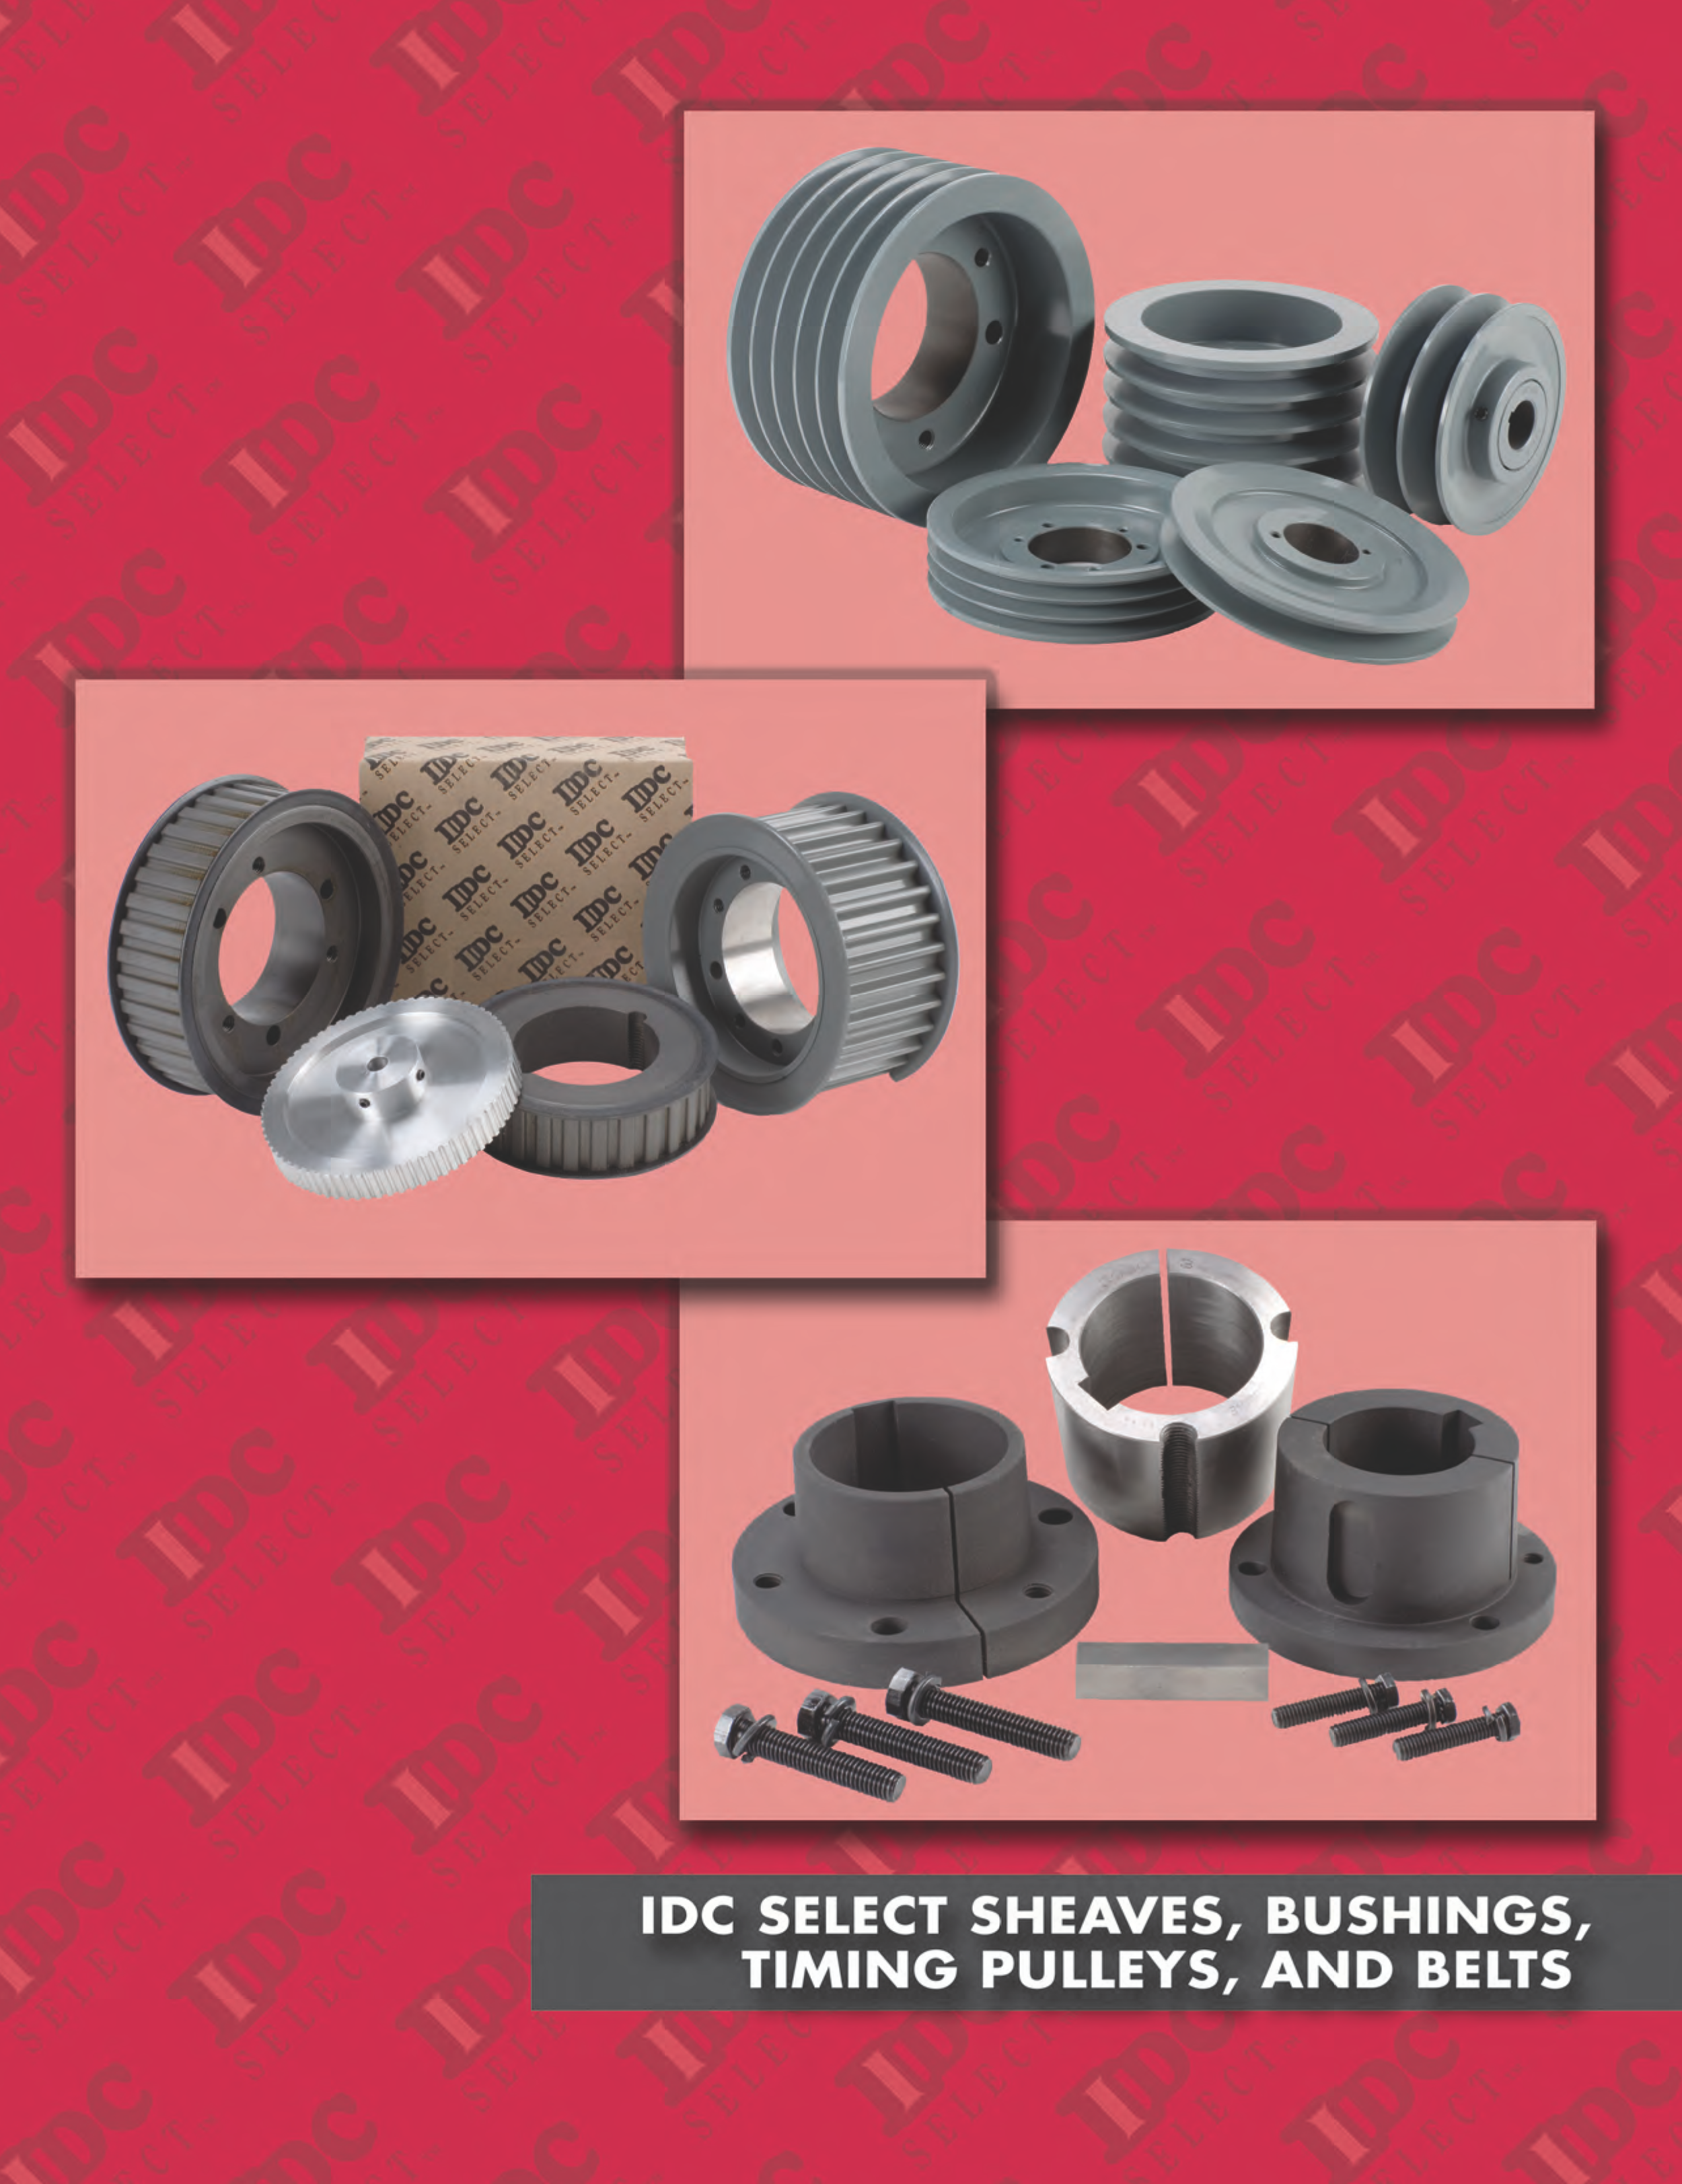 IDC Select Sheave, Bushings, Pulleys, and Belts